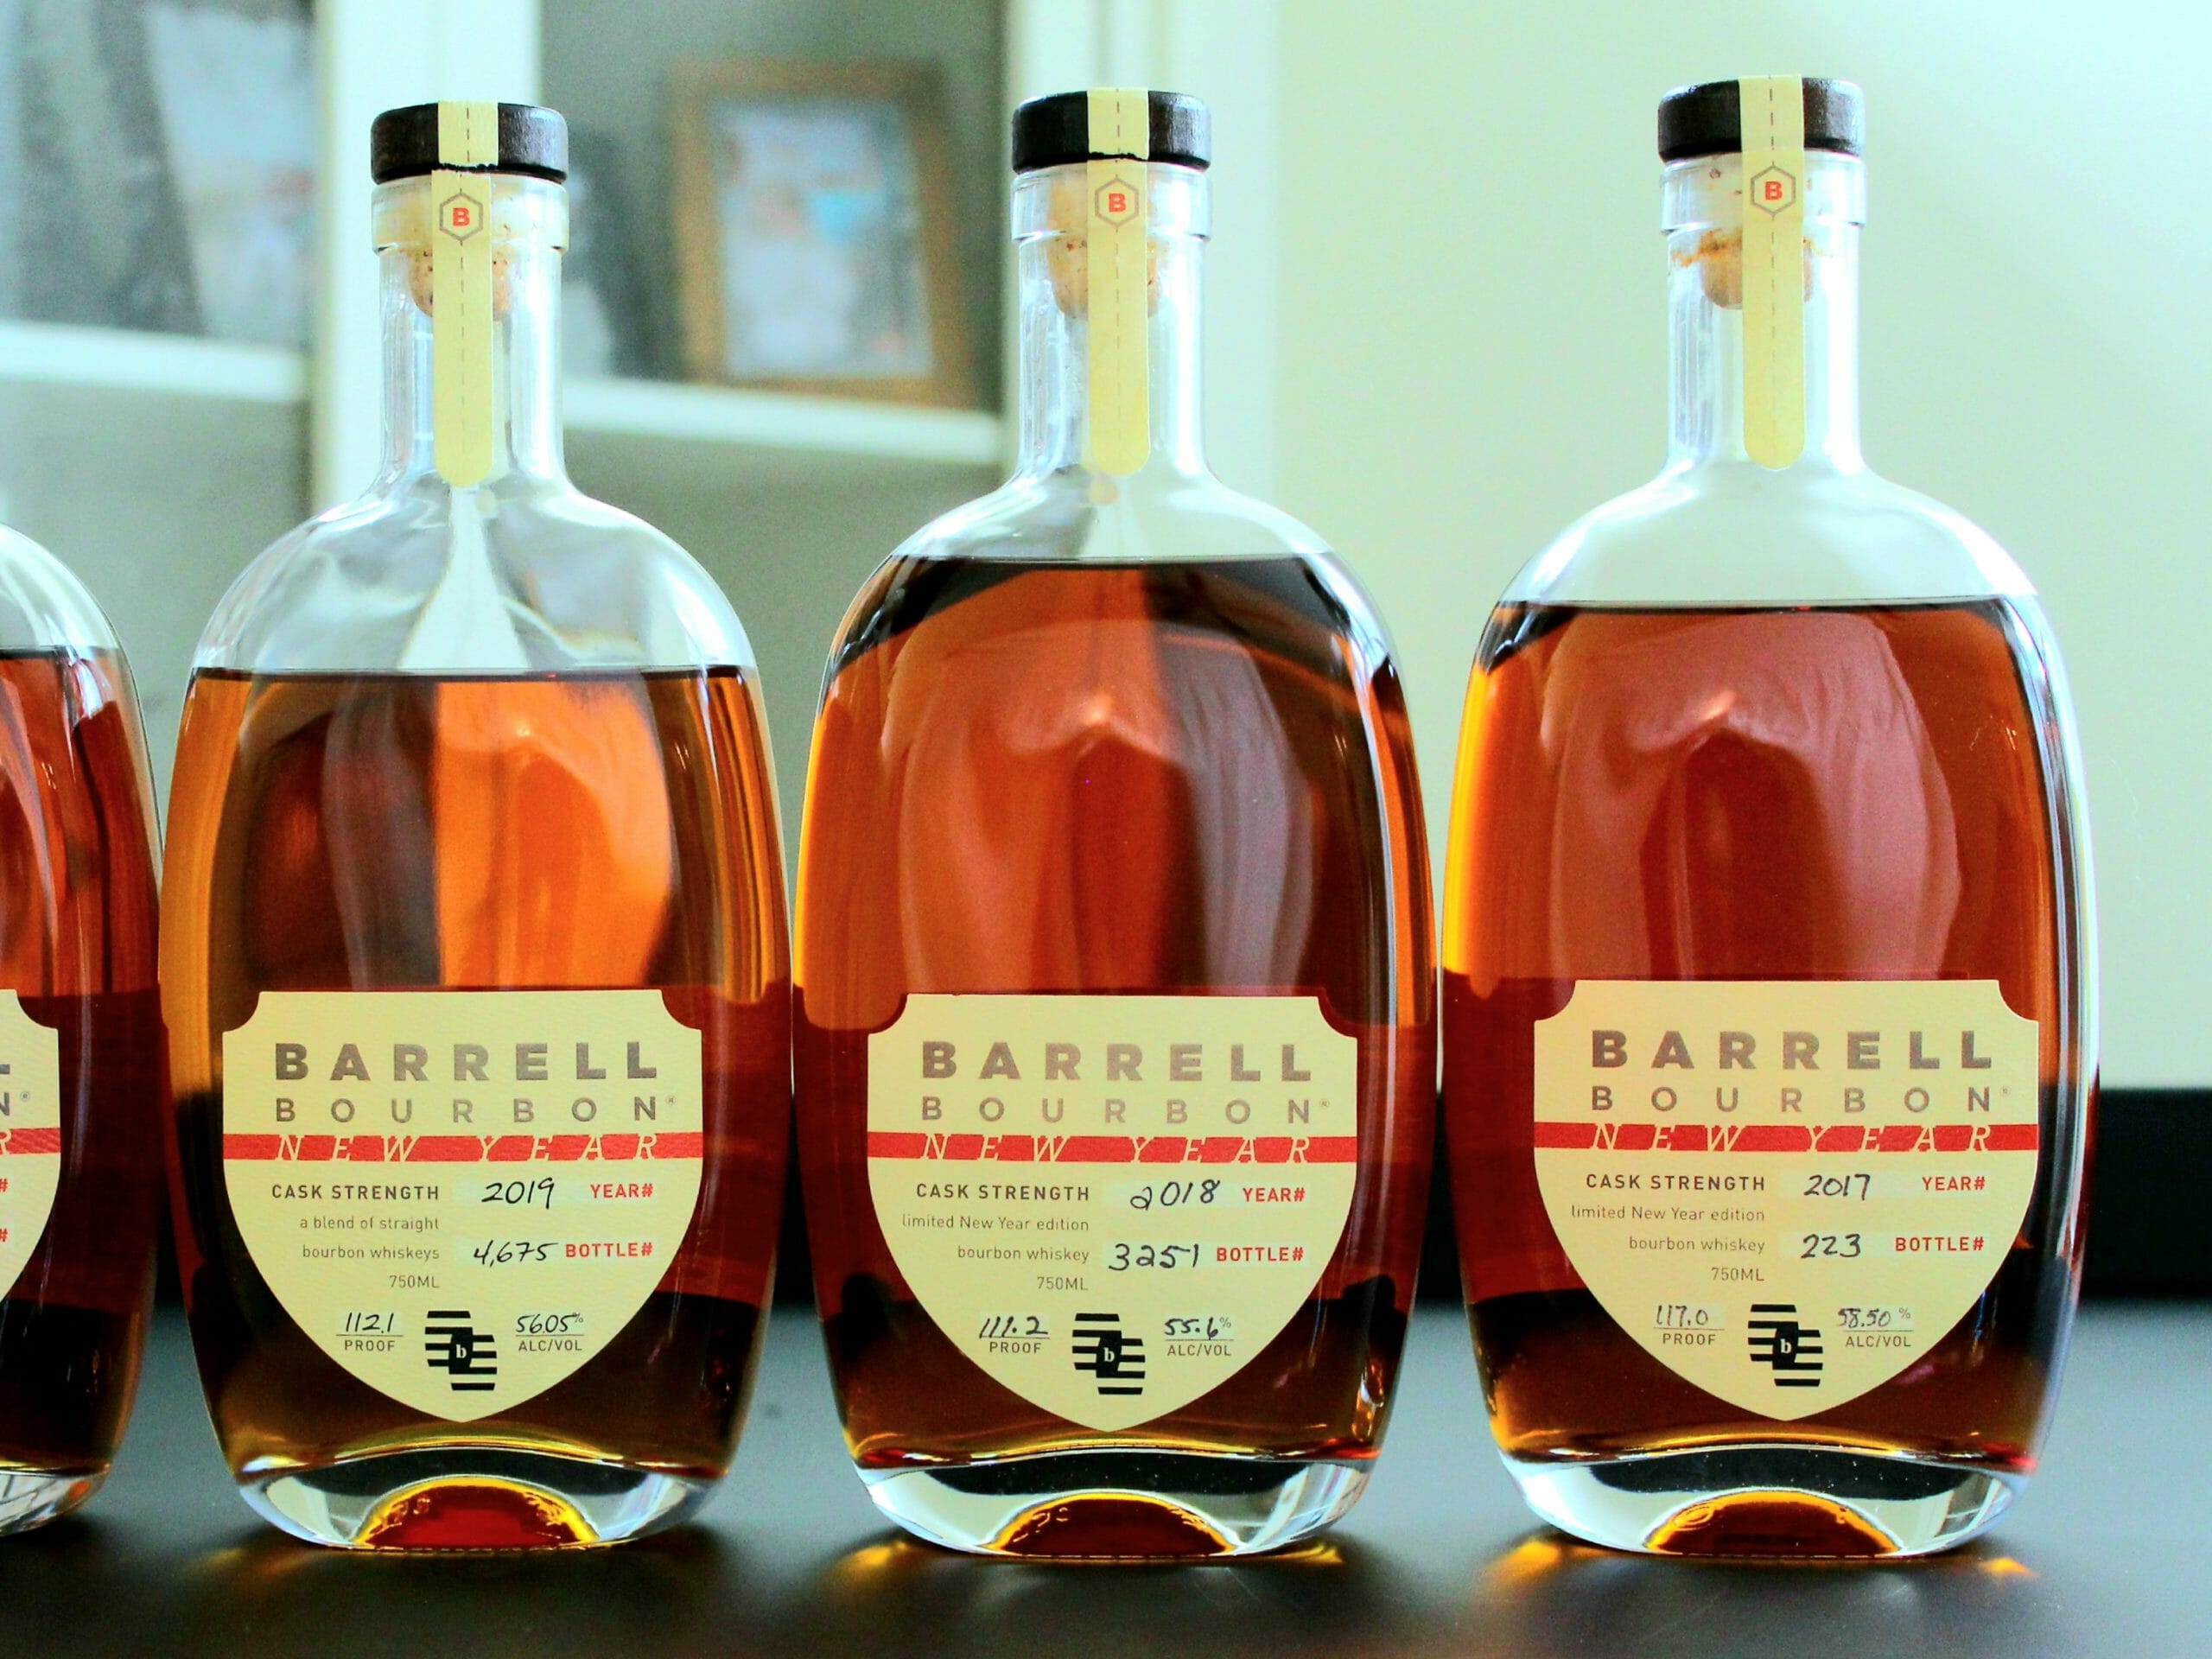 Barrell Bourbon New Year 2018 Review